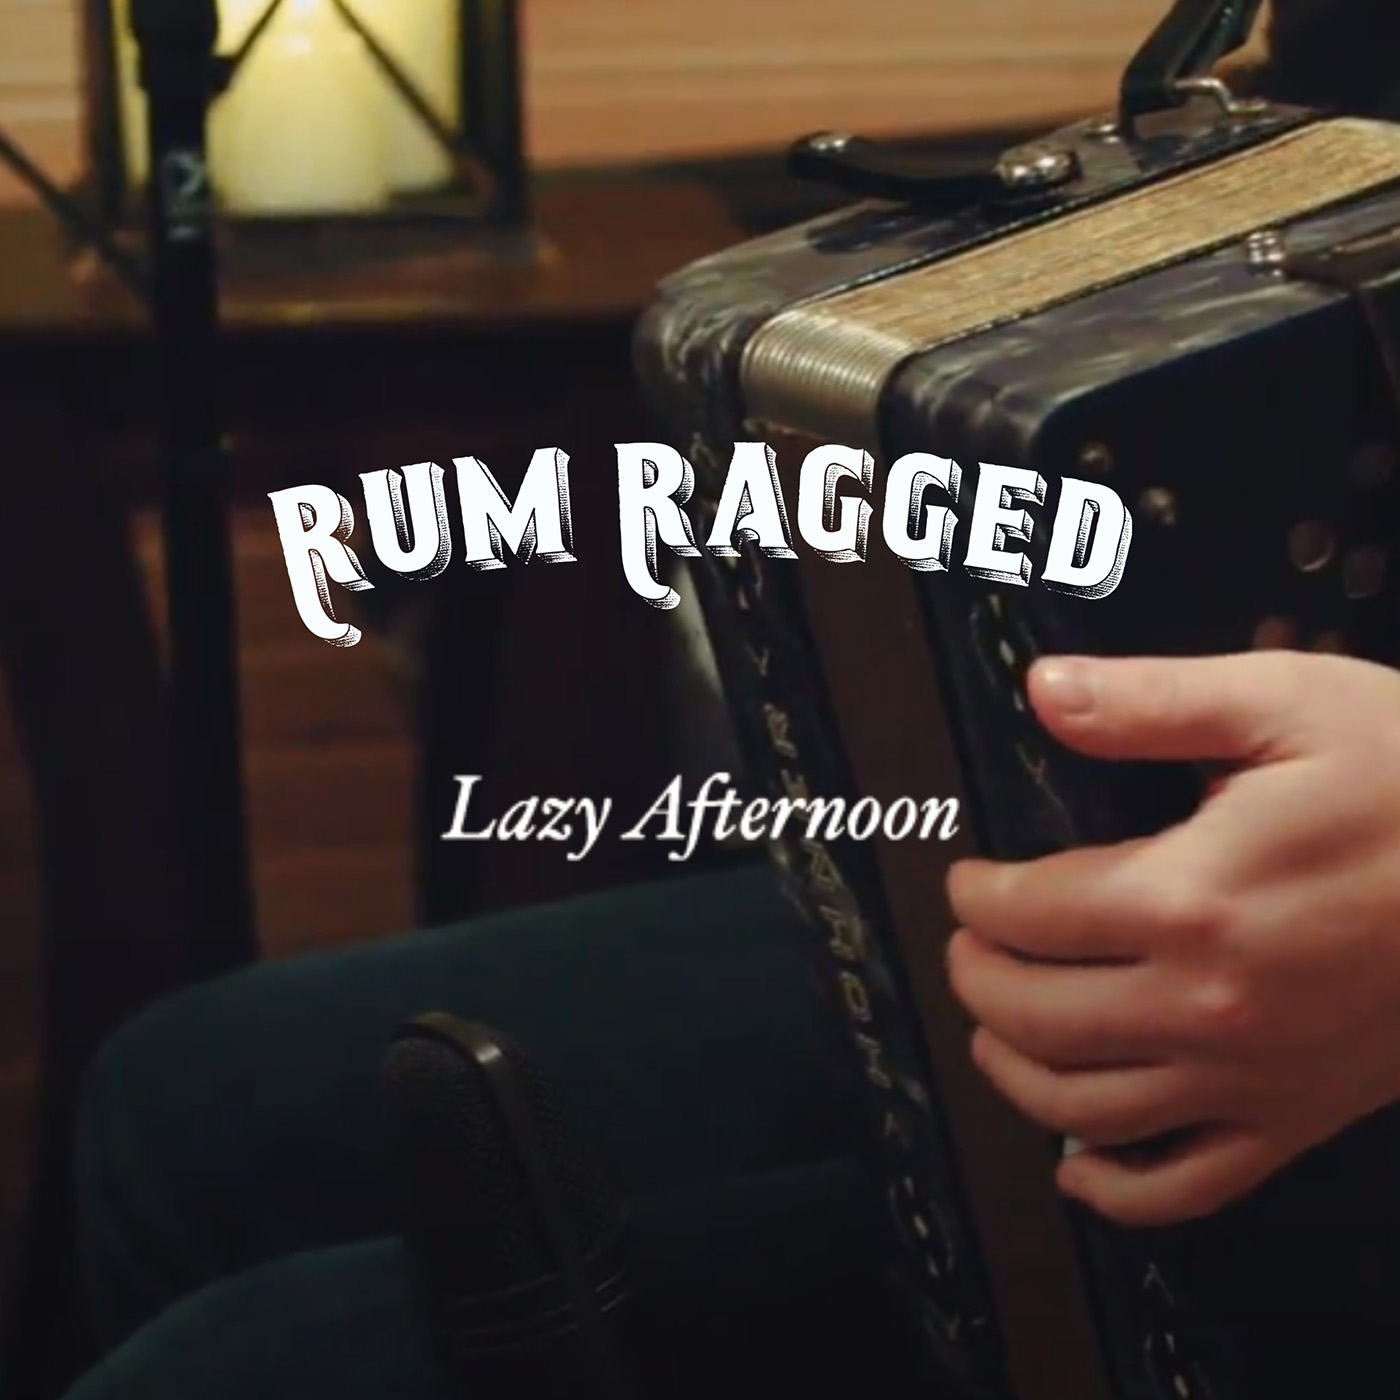 Rum Ragged - "Lazy Afternoon"